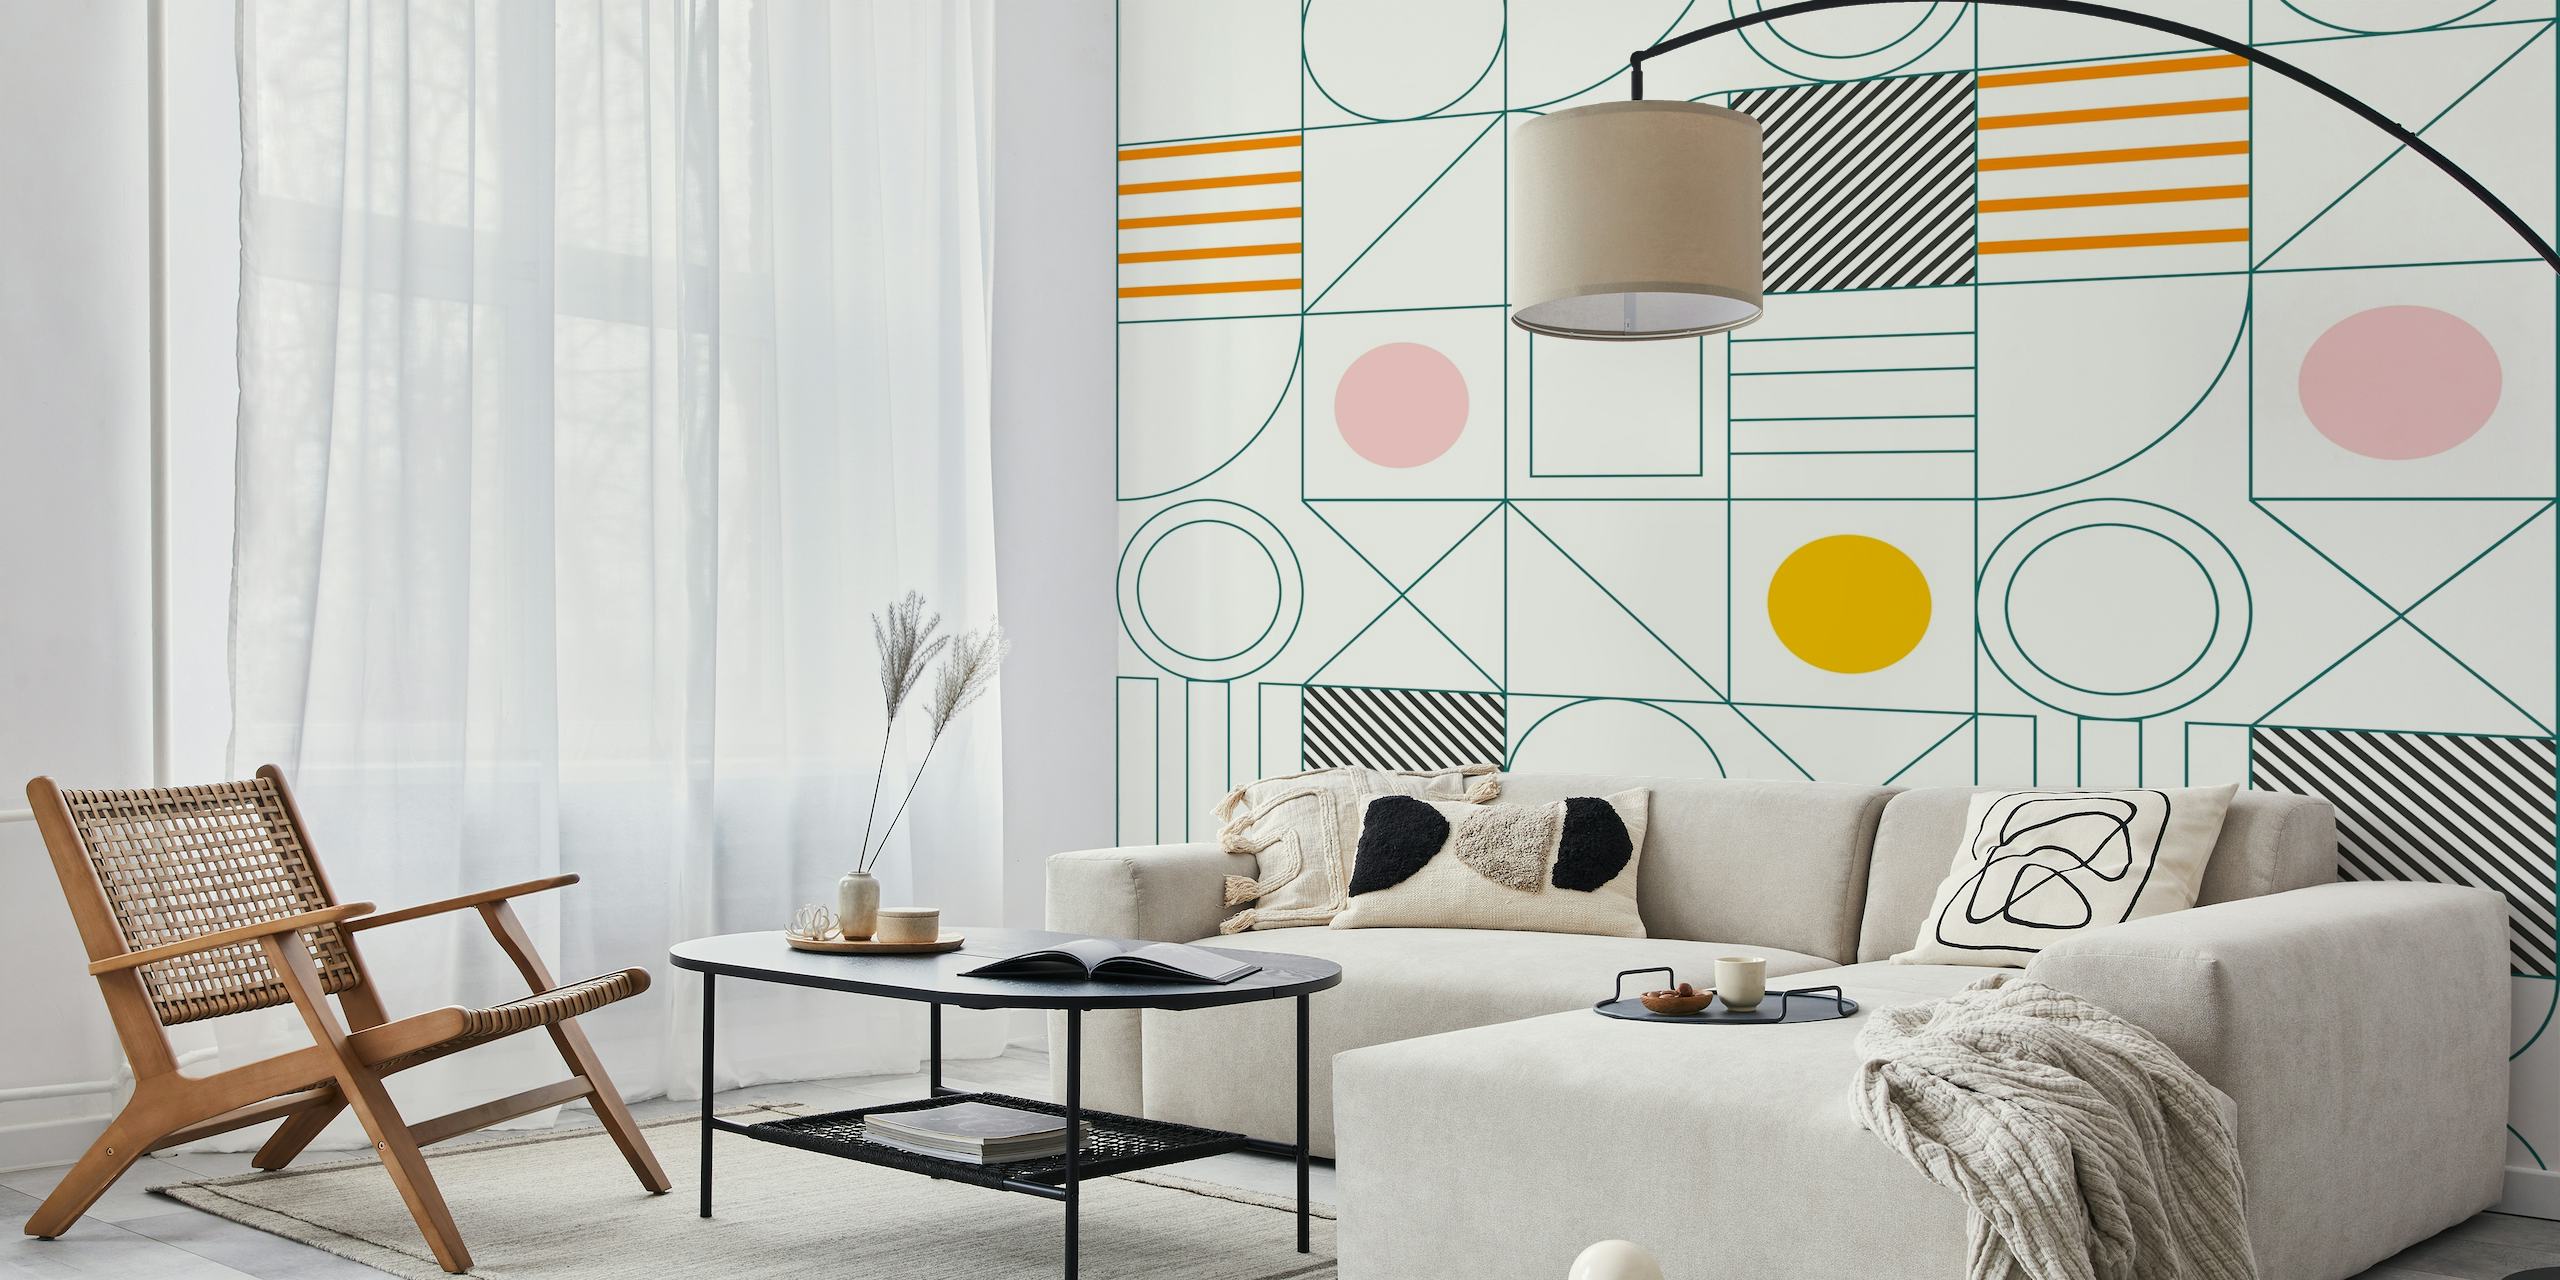 Abstract geometric Bauhaus-style wall mural with pastel colors and spring-like vibe